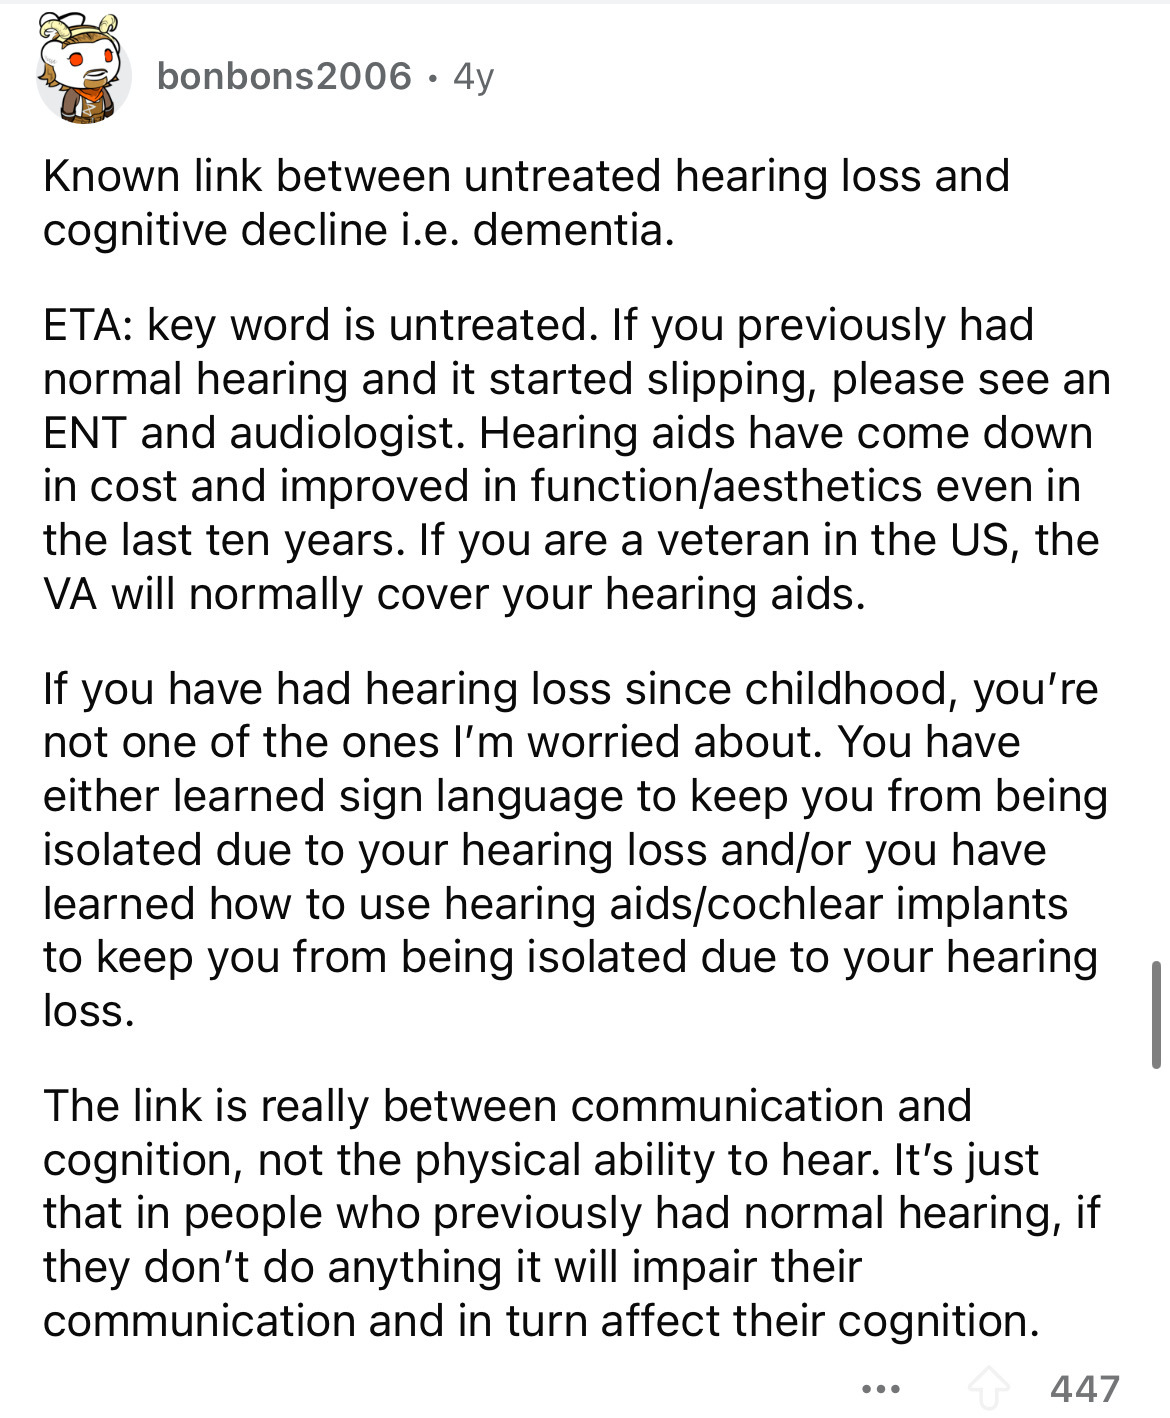 document - bonbons 2006 4y Known link between untreated hearing loss and cognitive decline i.e. dementia. Eta key word is untreated. If you previously had normal hearing and it started slipping, please see an Ent and audiologist. Hearing aids have come do